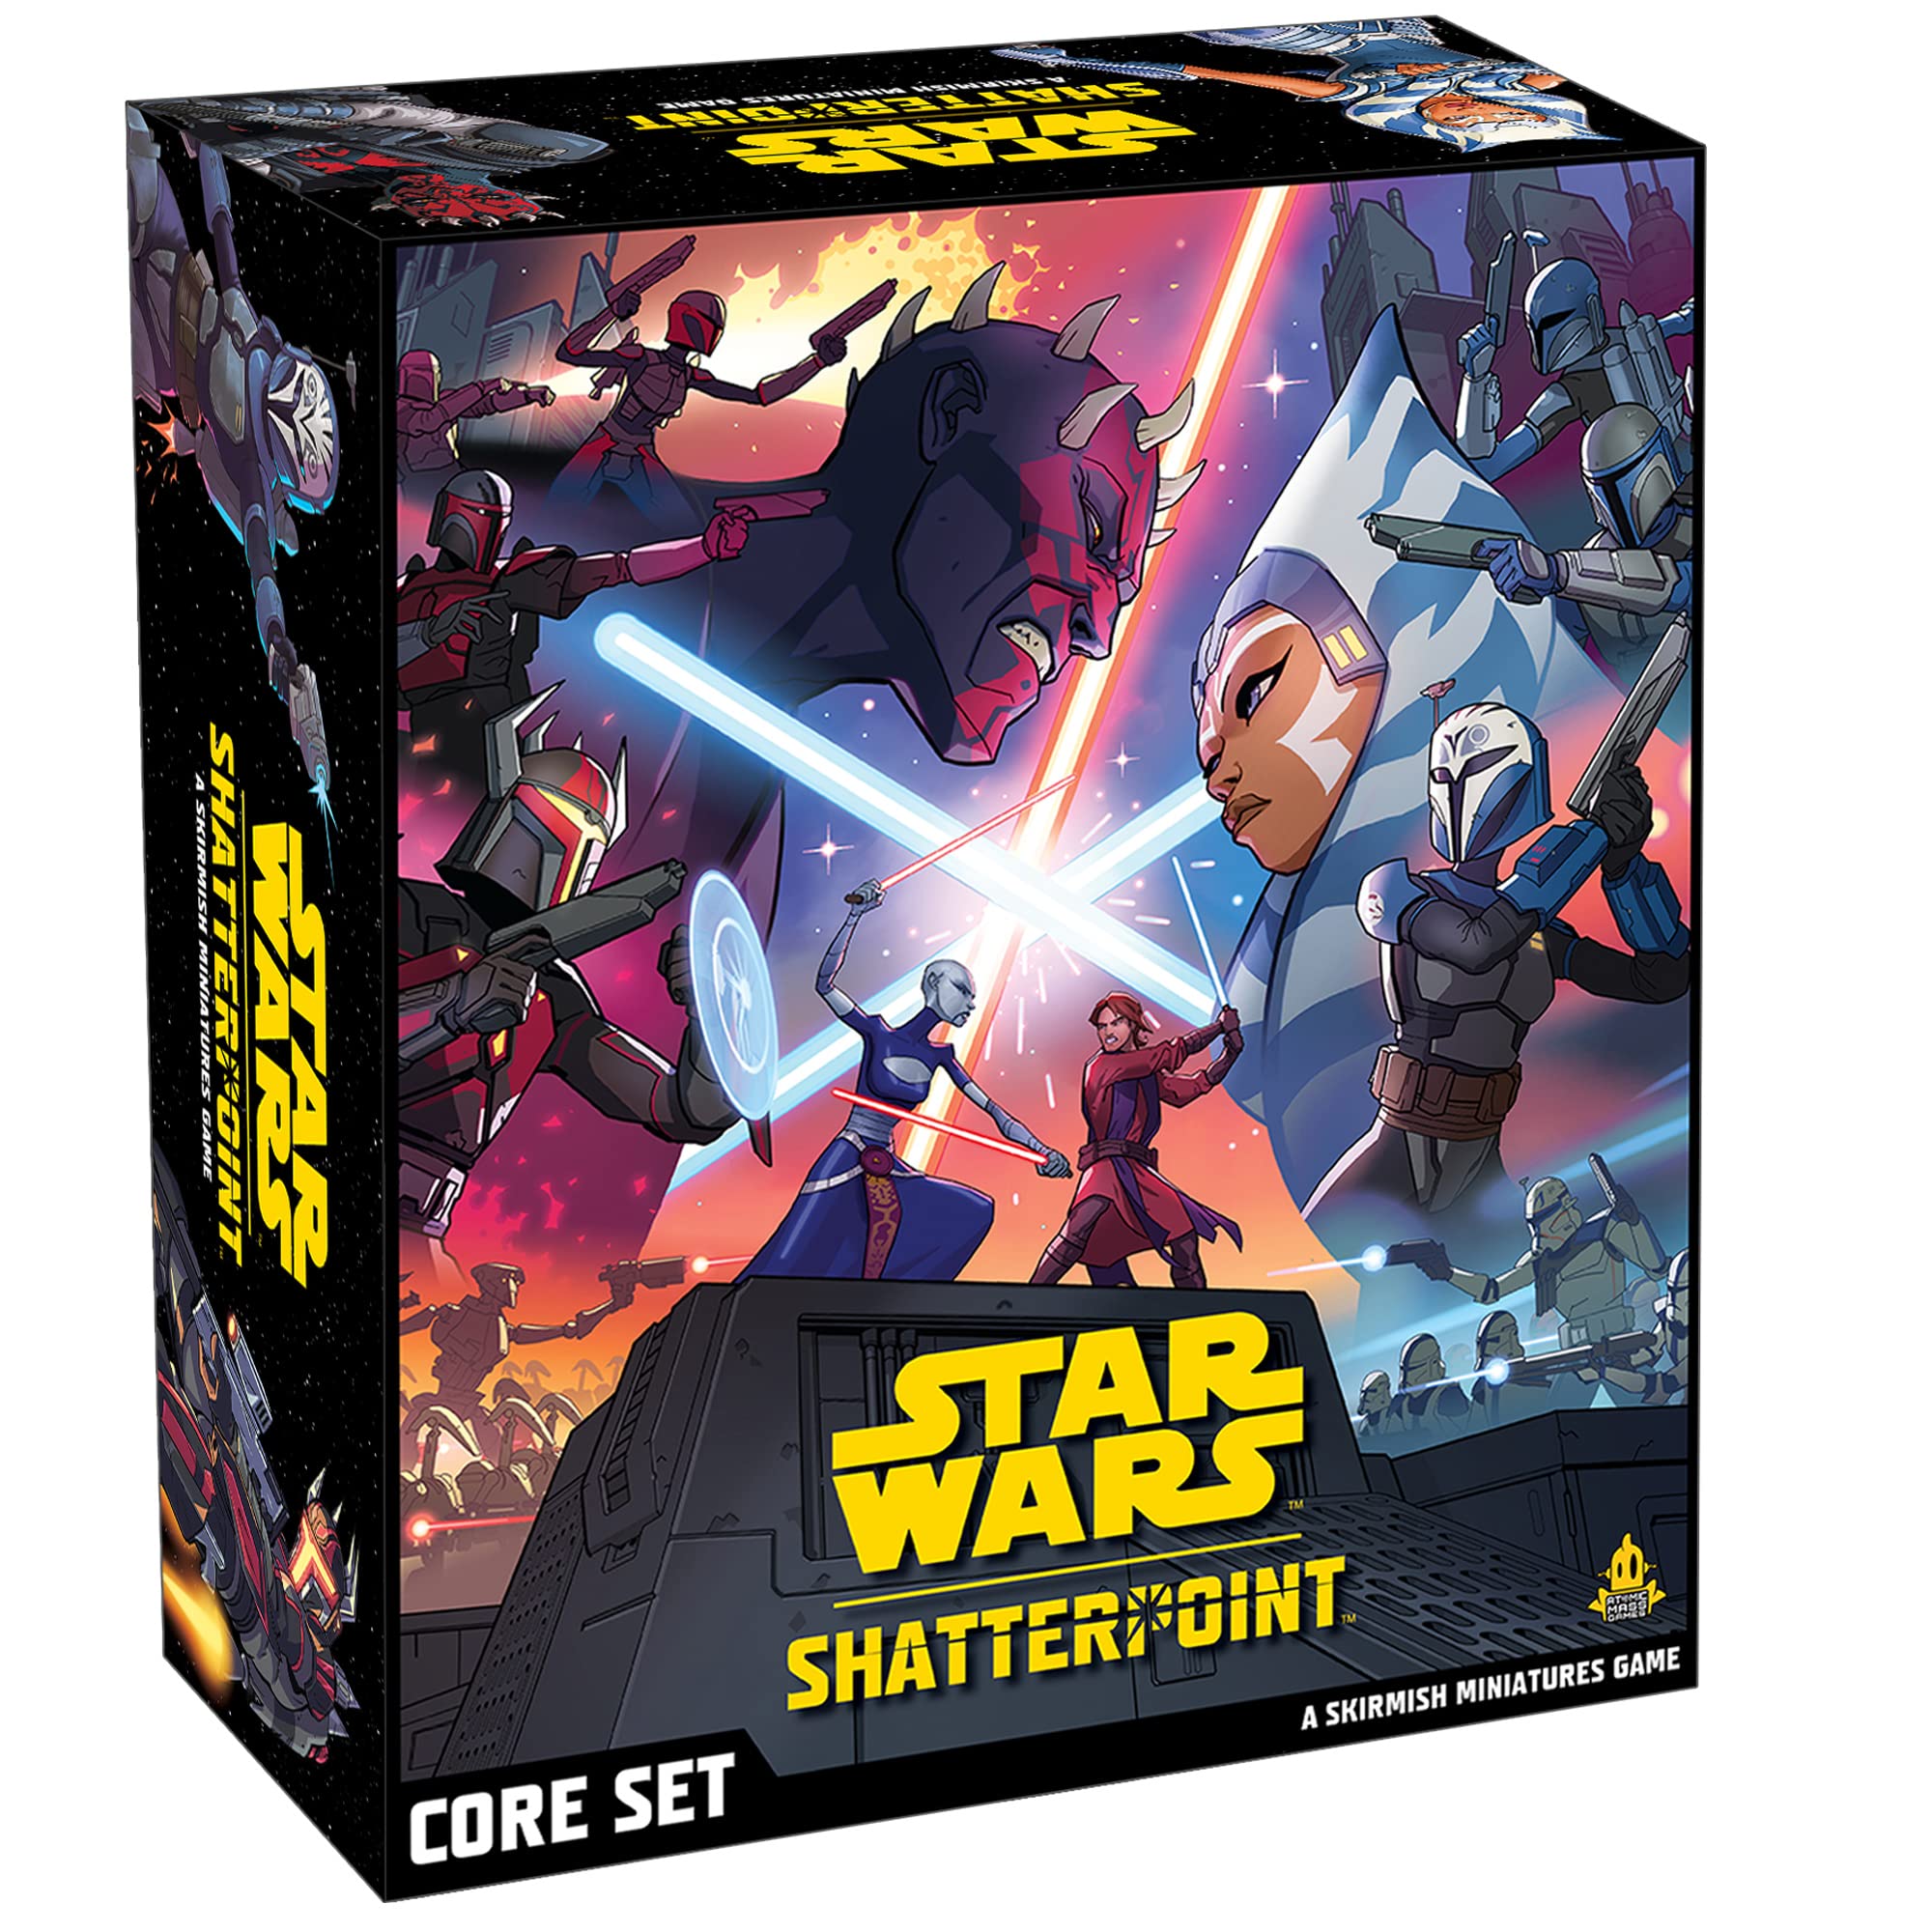 Star Wars Shatterpoint Core Set - Tabletop Miniatures Game, Strategy Game, Skirmish Battle Game for Kids and Adults, Ages 14+, 2 Players, 90 Min Playtime, Made by Atomic Mass Games